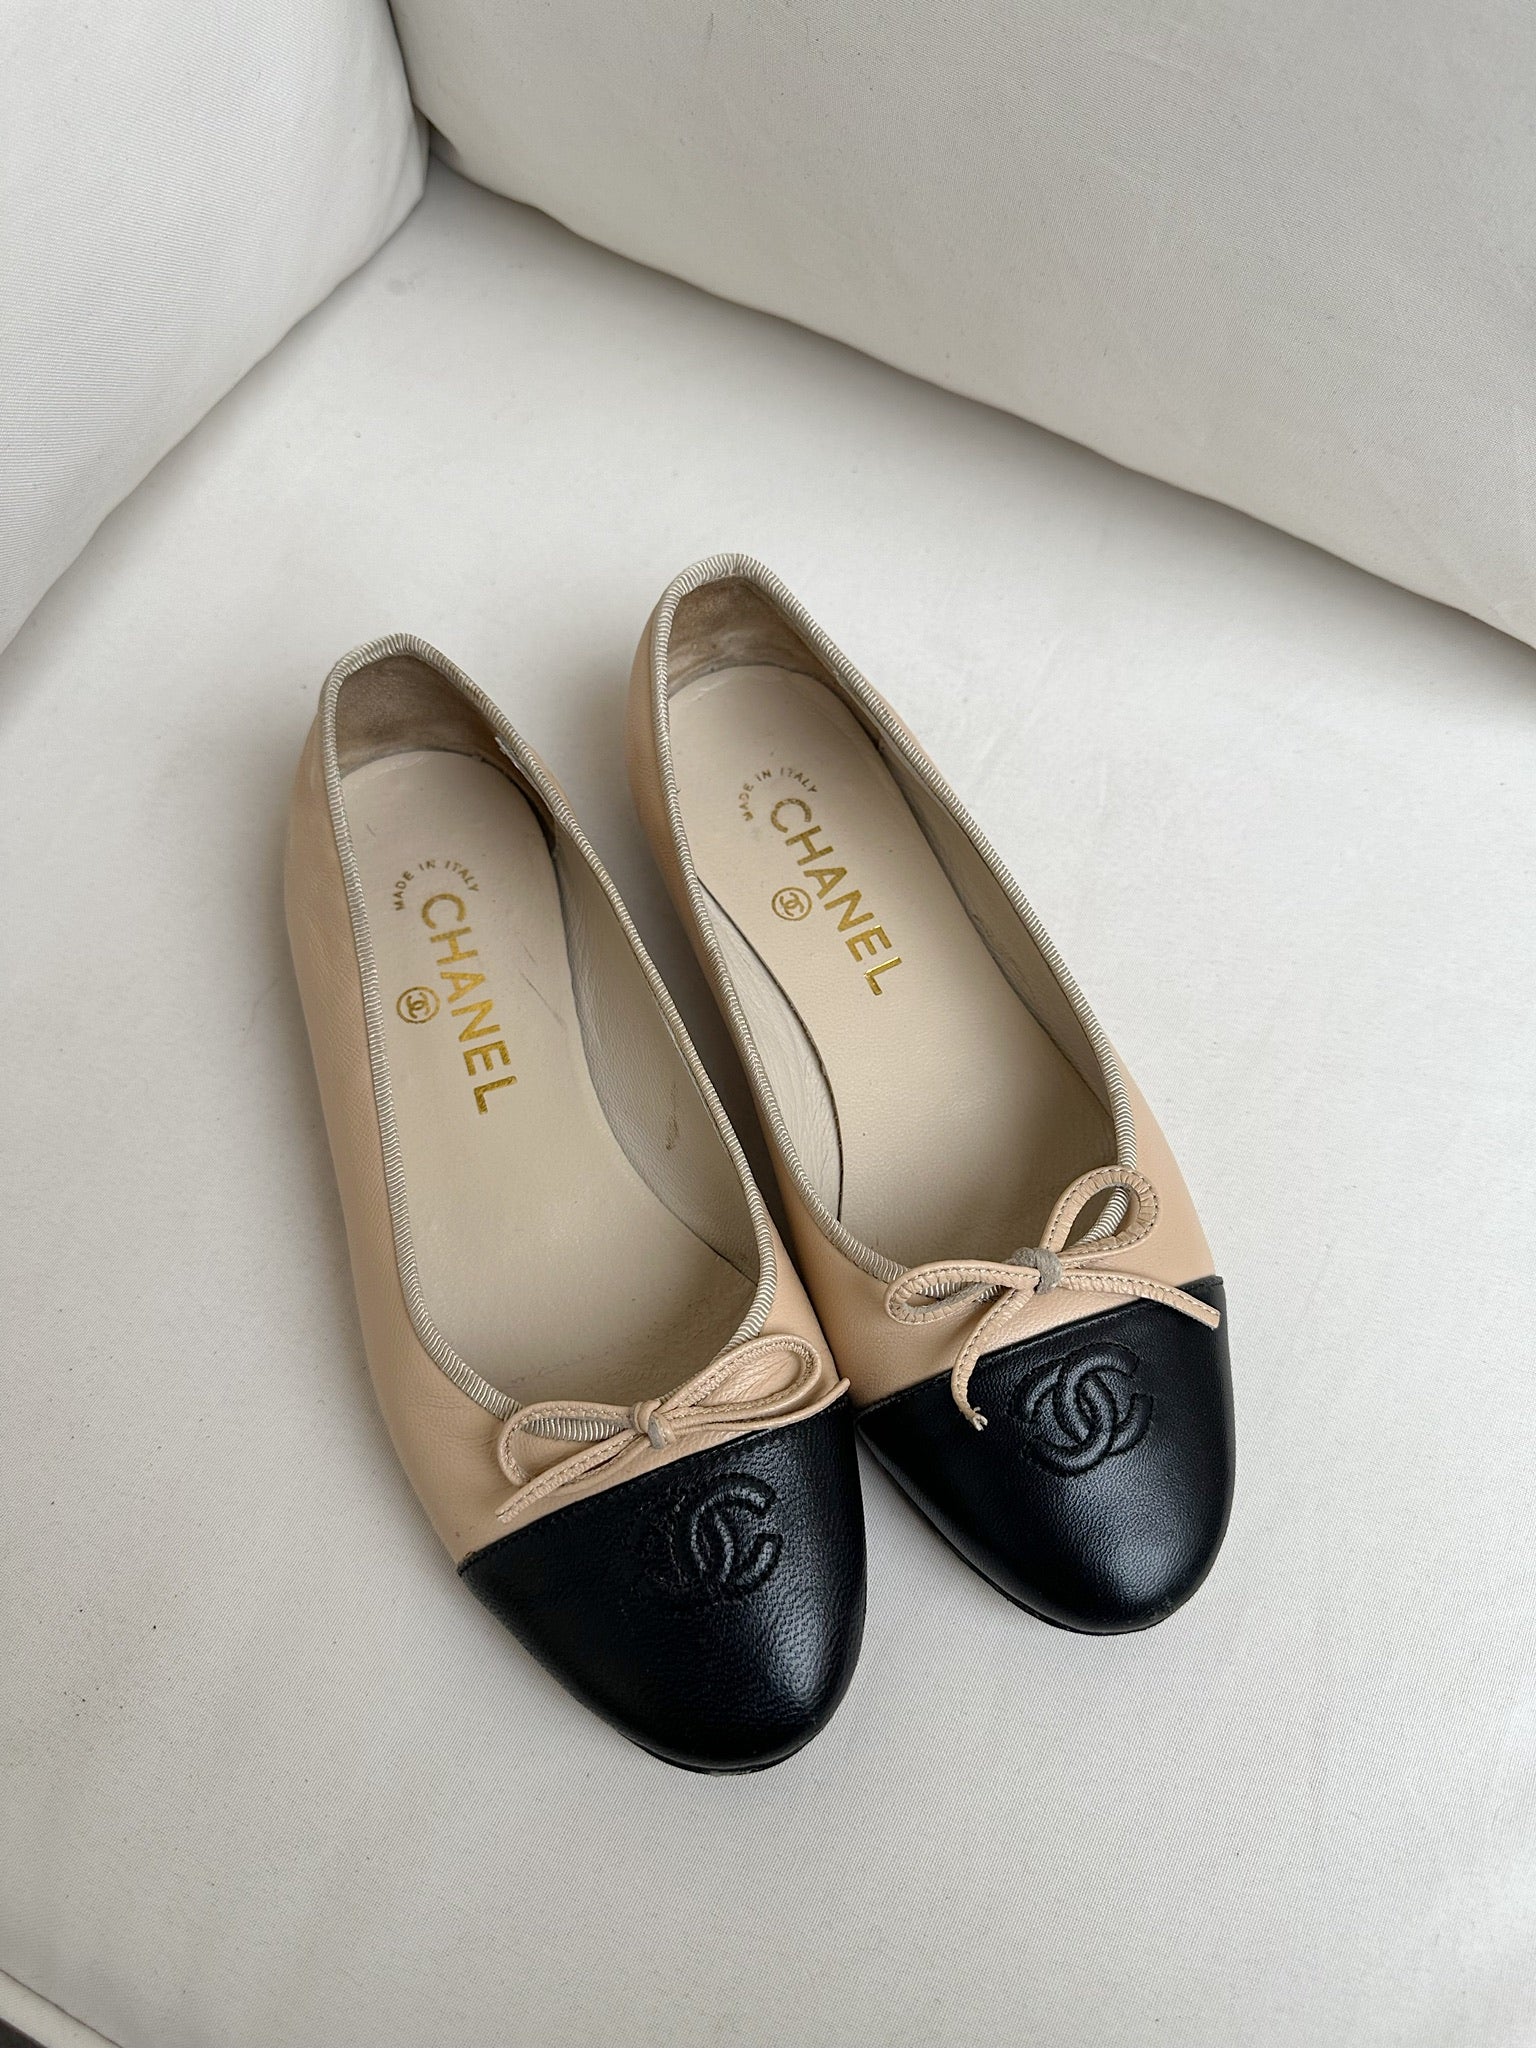 CHANEL, Shoes, Chanel Silver Ballerina Flats Size 38